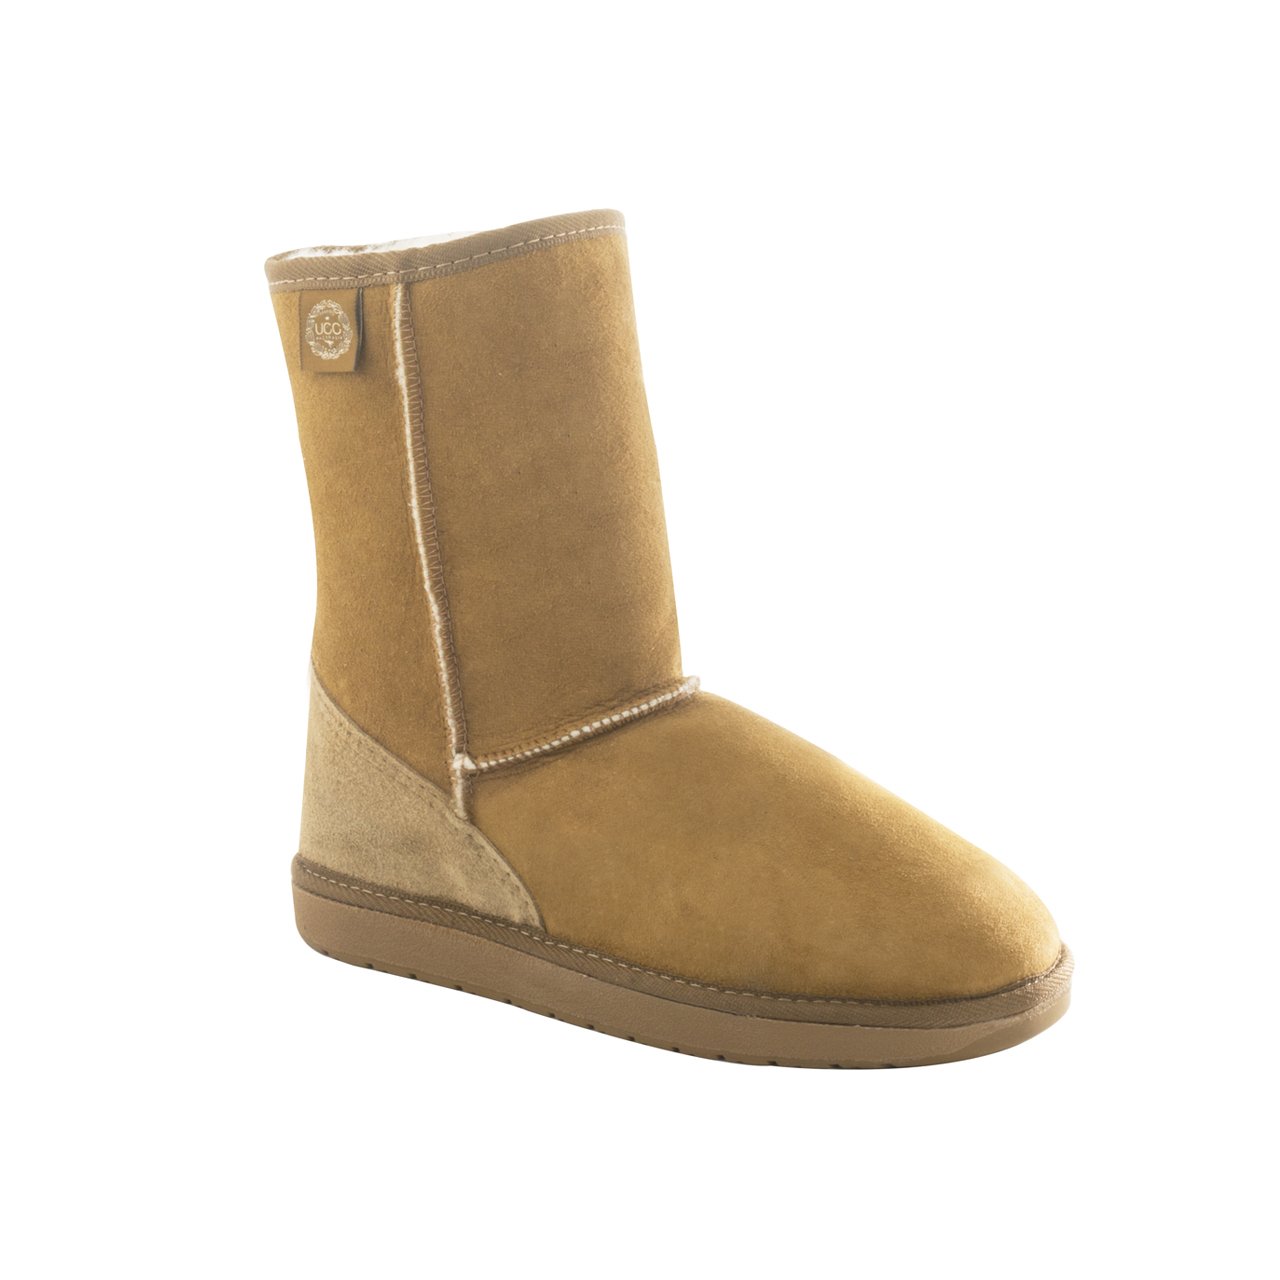 are ugg boots made in australia